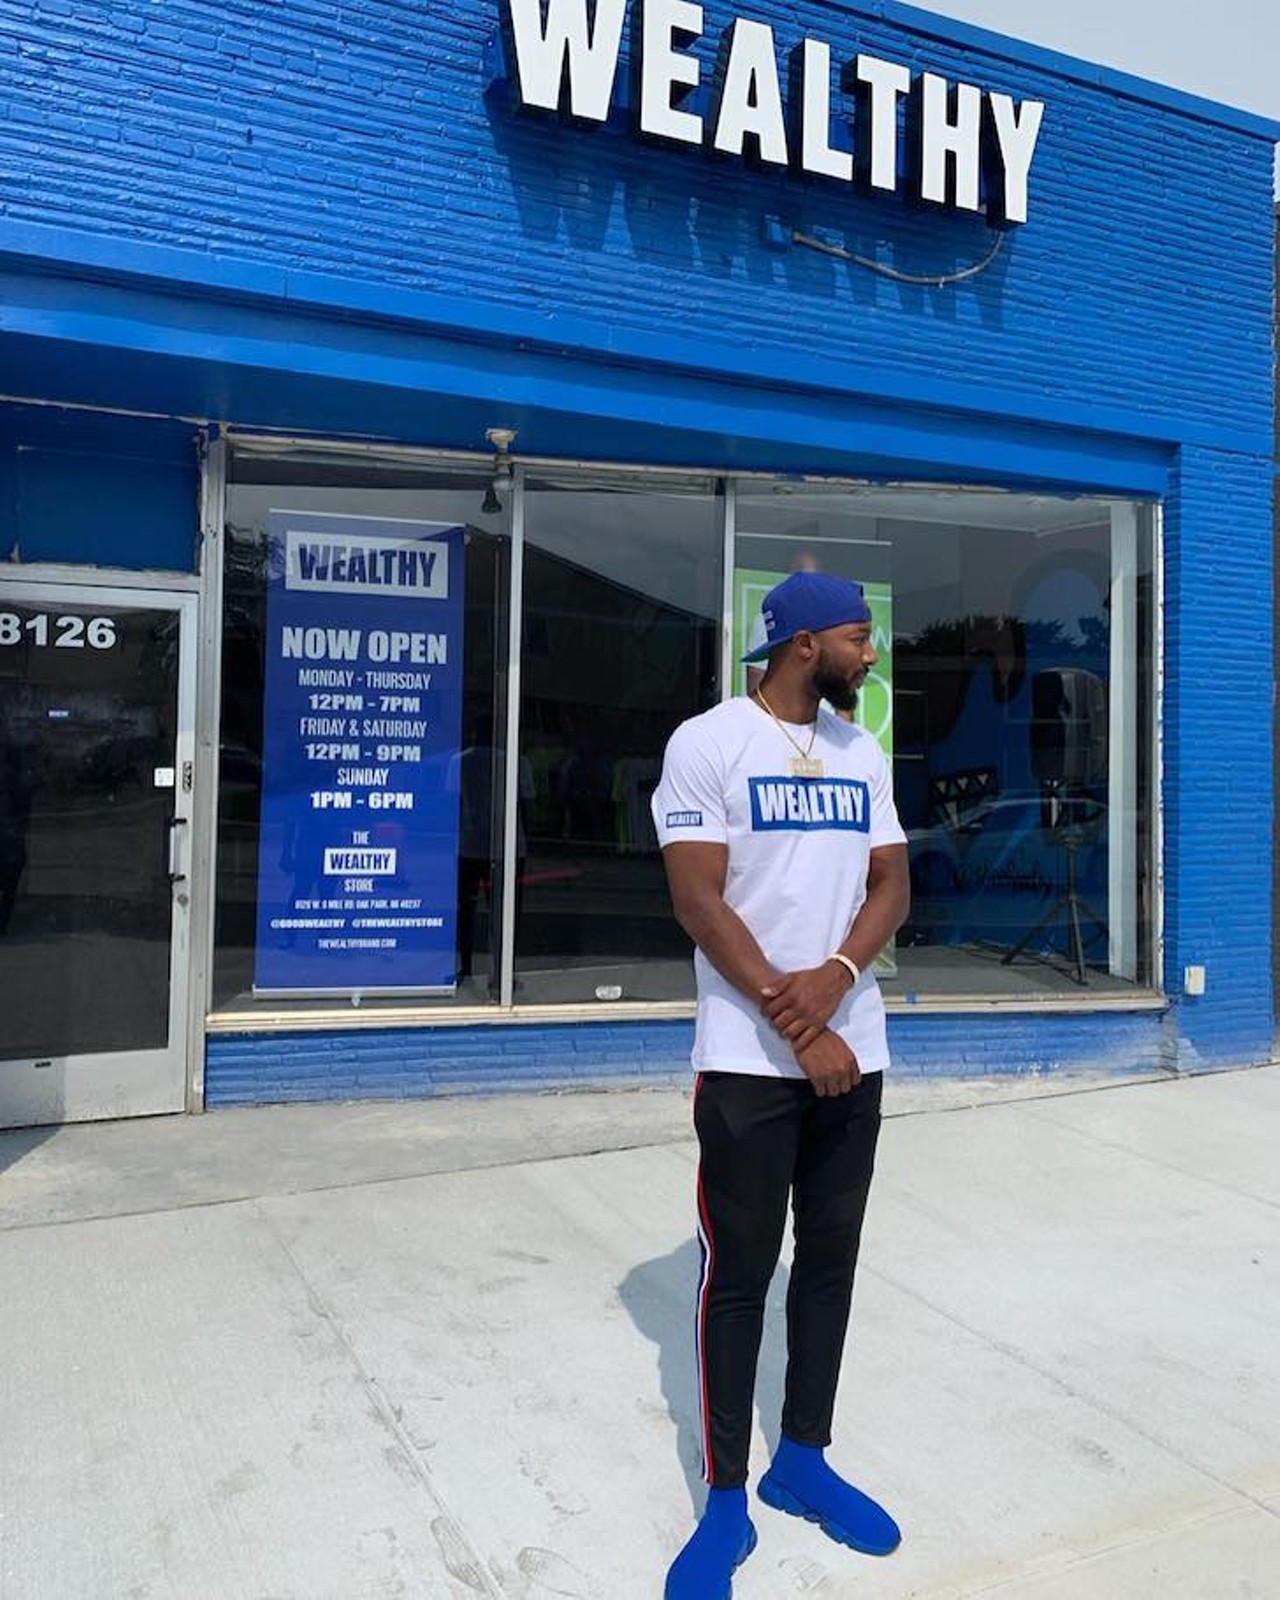 The Wealthy Brand
8126 W. Nine Mile Rd., thewealthybrand.com
This luxury streetwear brand creates T-shirts, athletic apparel, sweatshirts, and more. Its goal is to promote generational wealth throughout the Black community. They are known nationally, and have sold apparel all over the country, as well as Canada.
Photo via The Wealthy Brand/Facebook